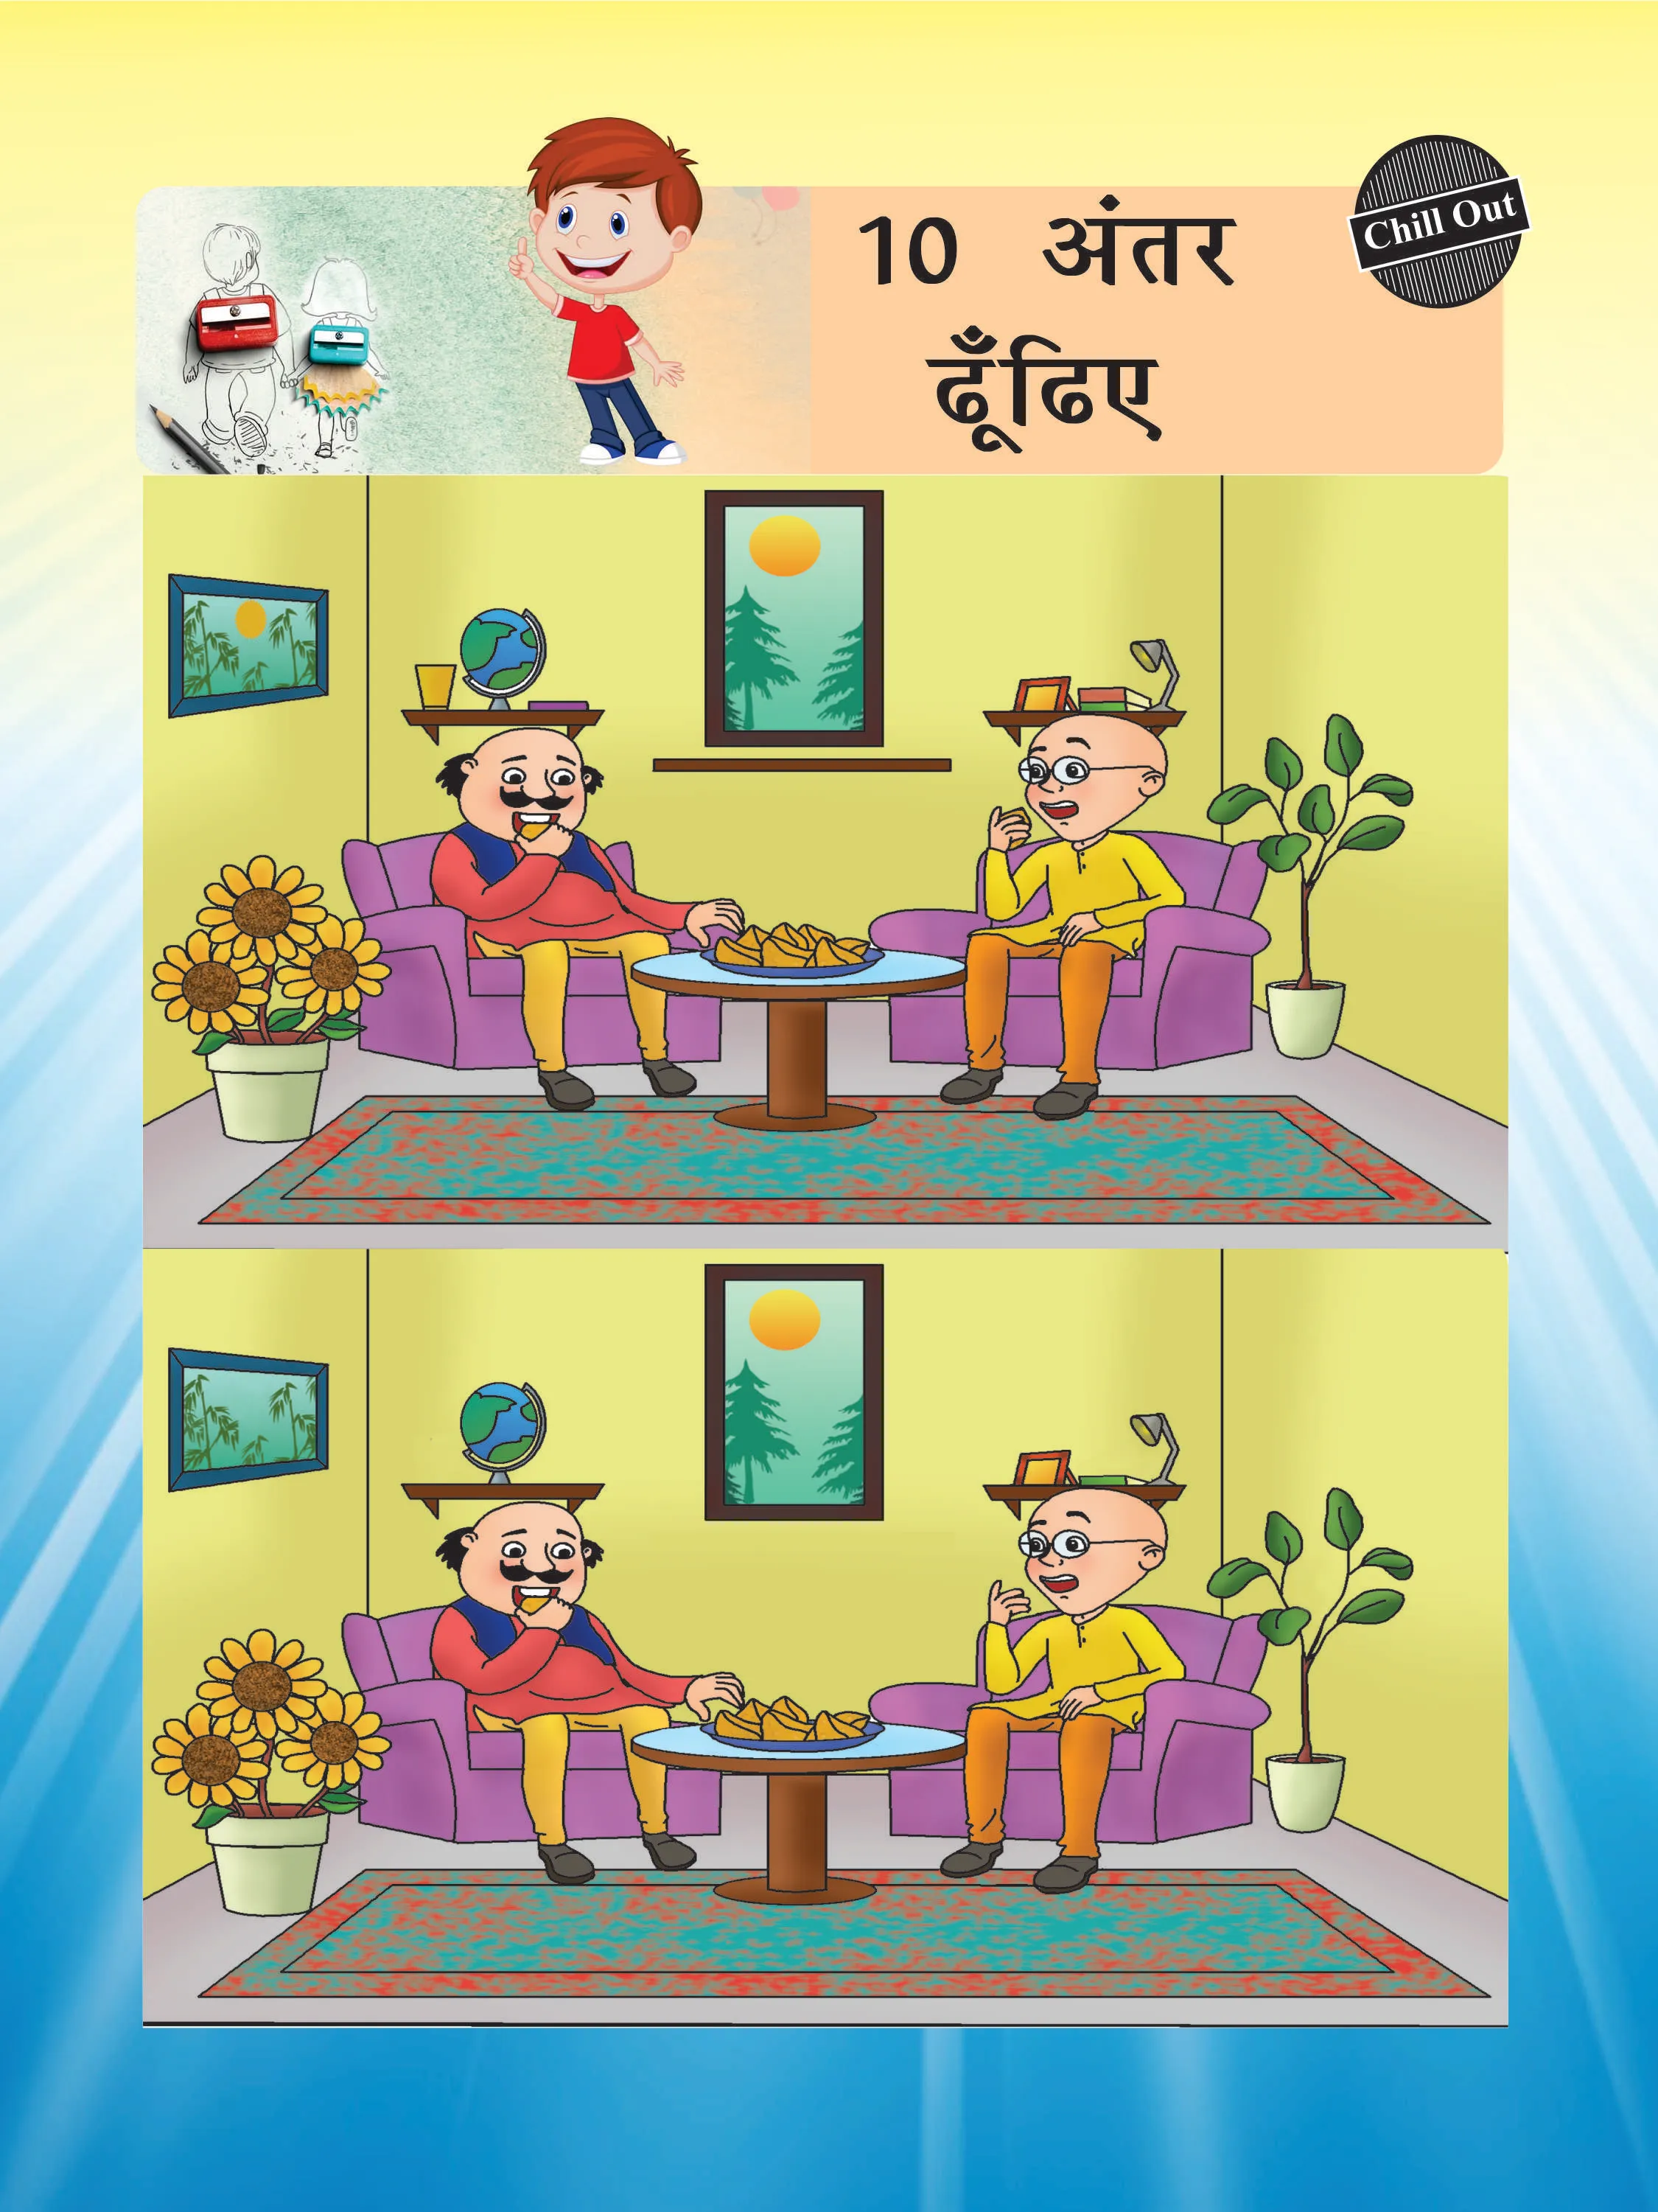 Motu and patlu find the difference puzzle